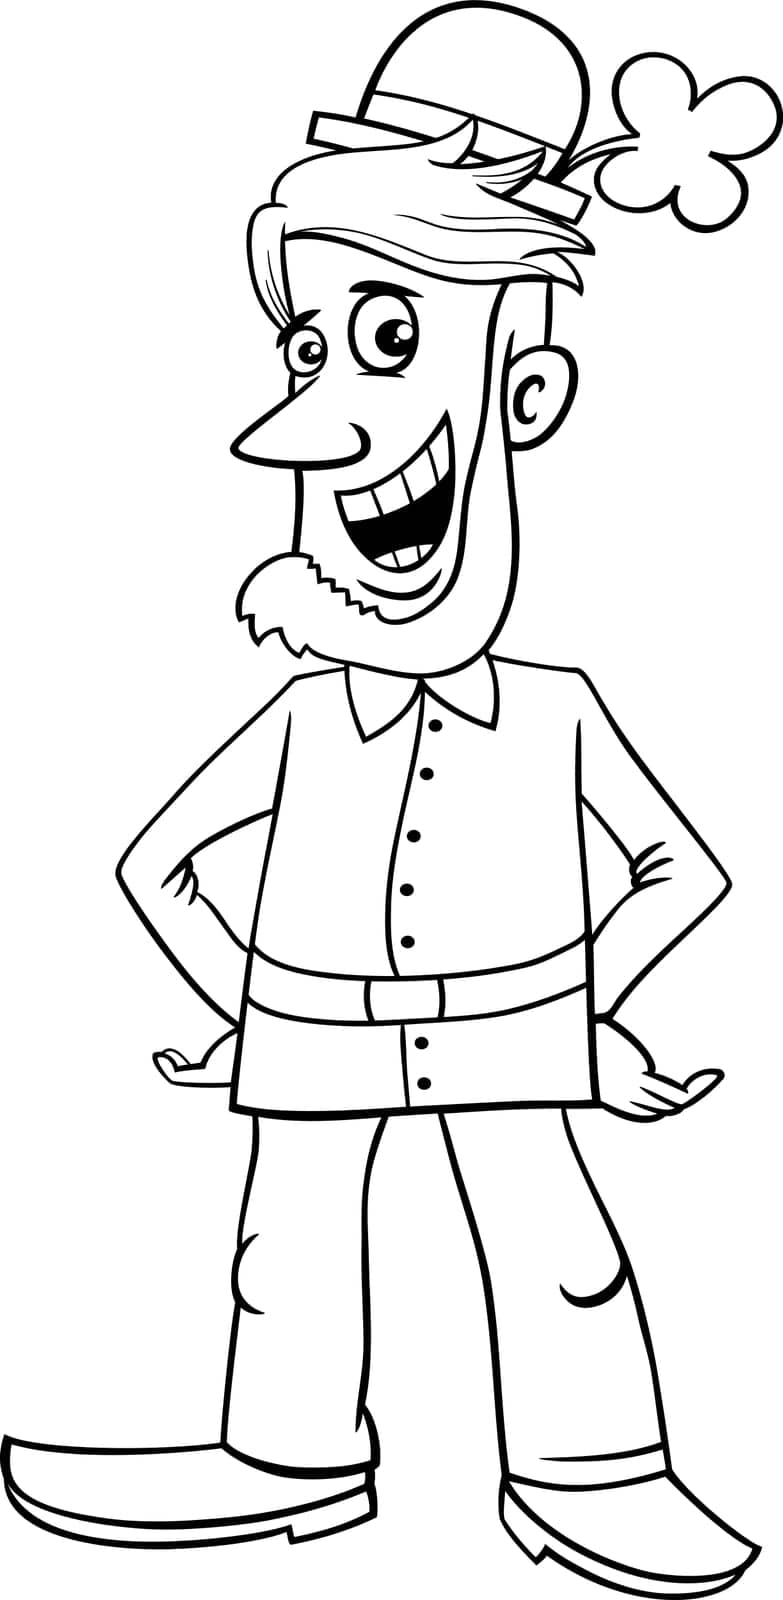 Black and white cartoon illustration of Leprechaun fantasy character on Saint Patrick Day coloring page